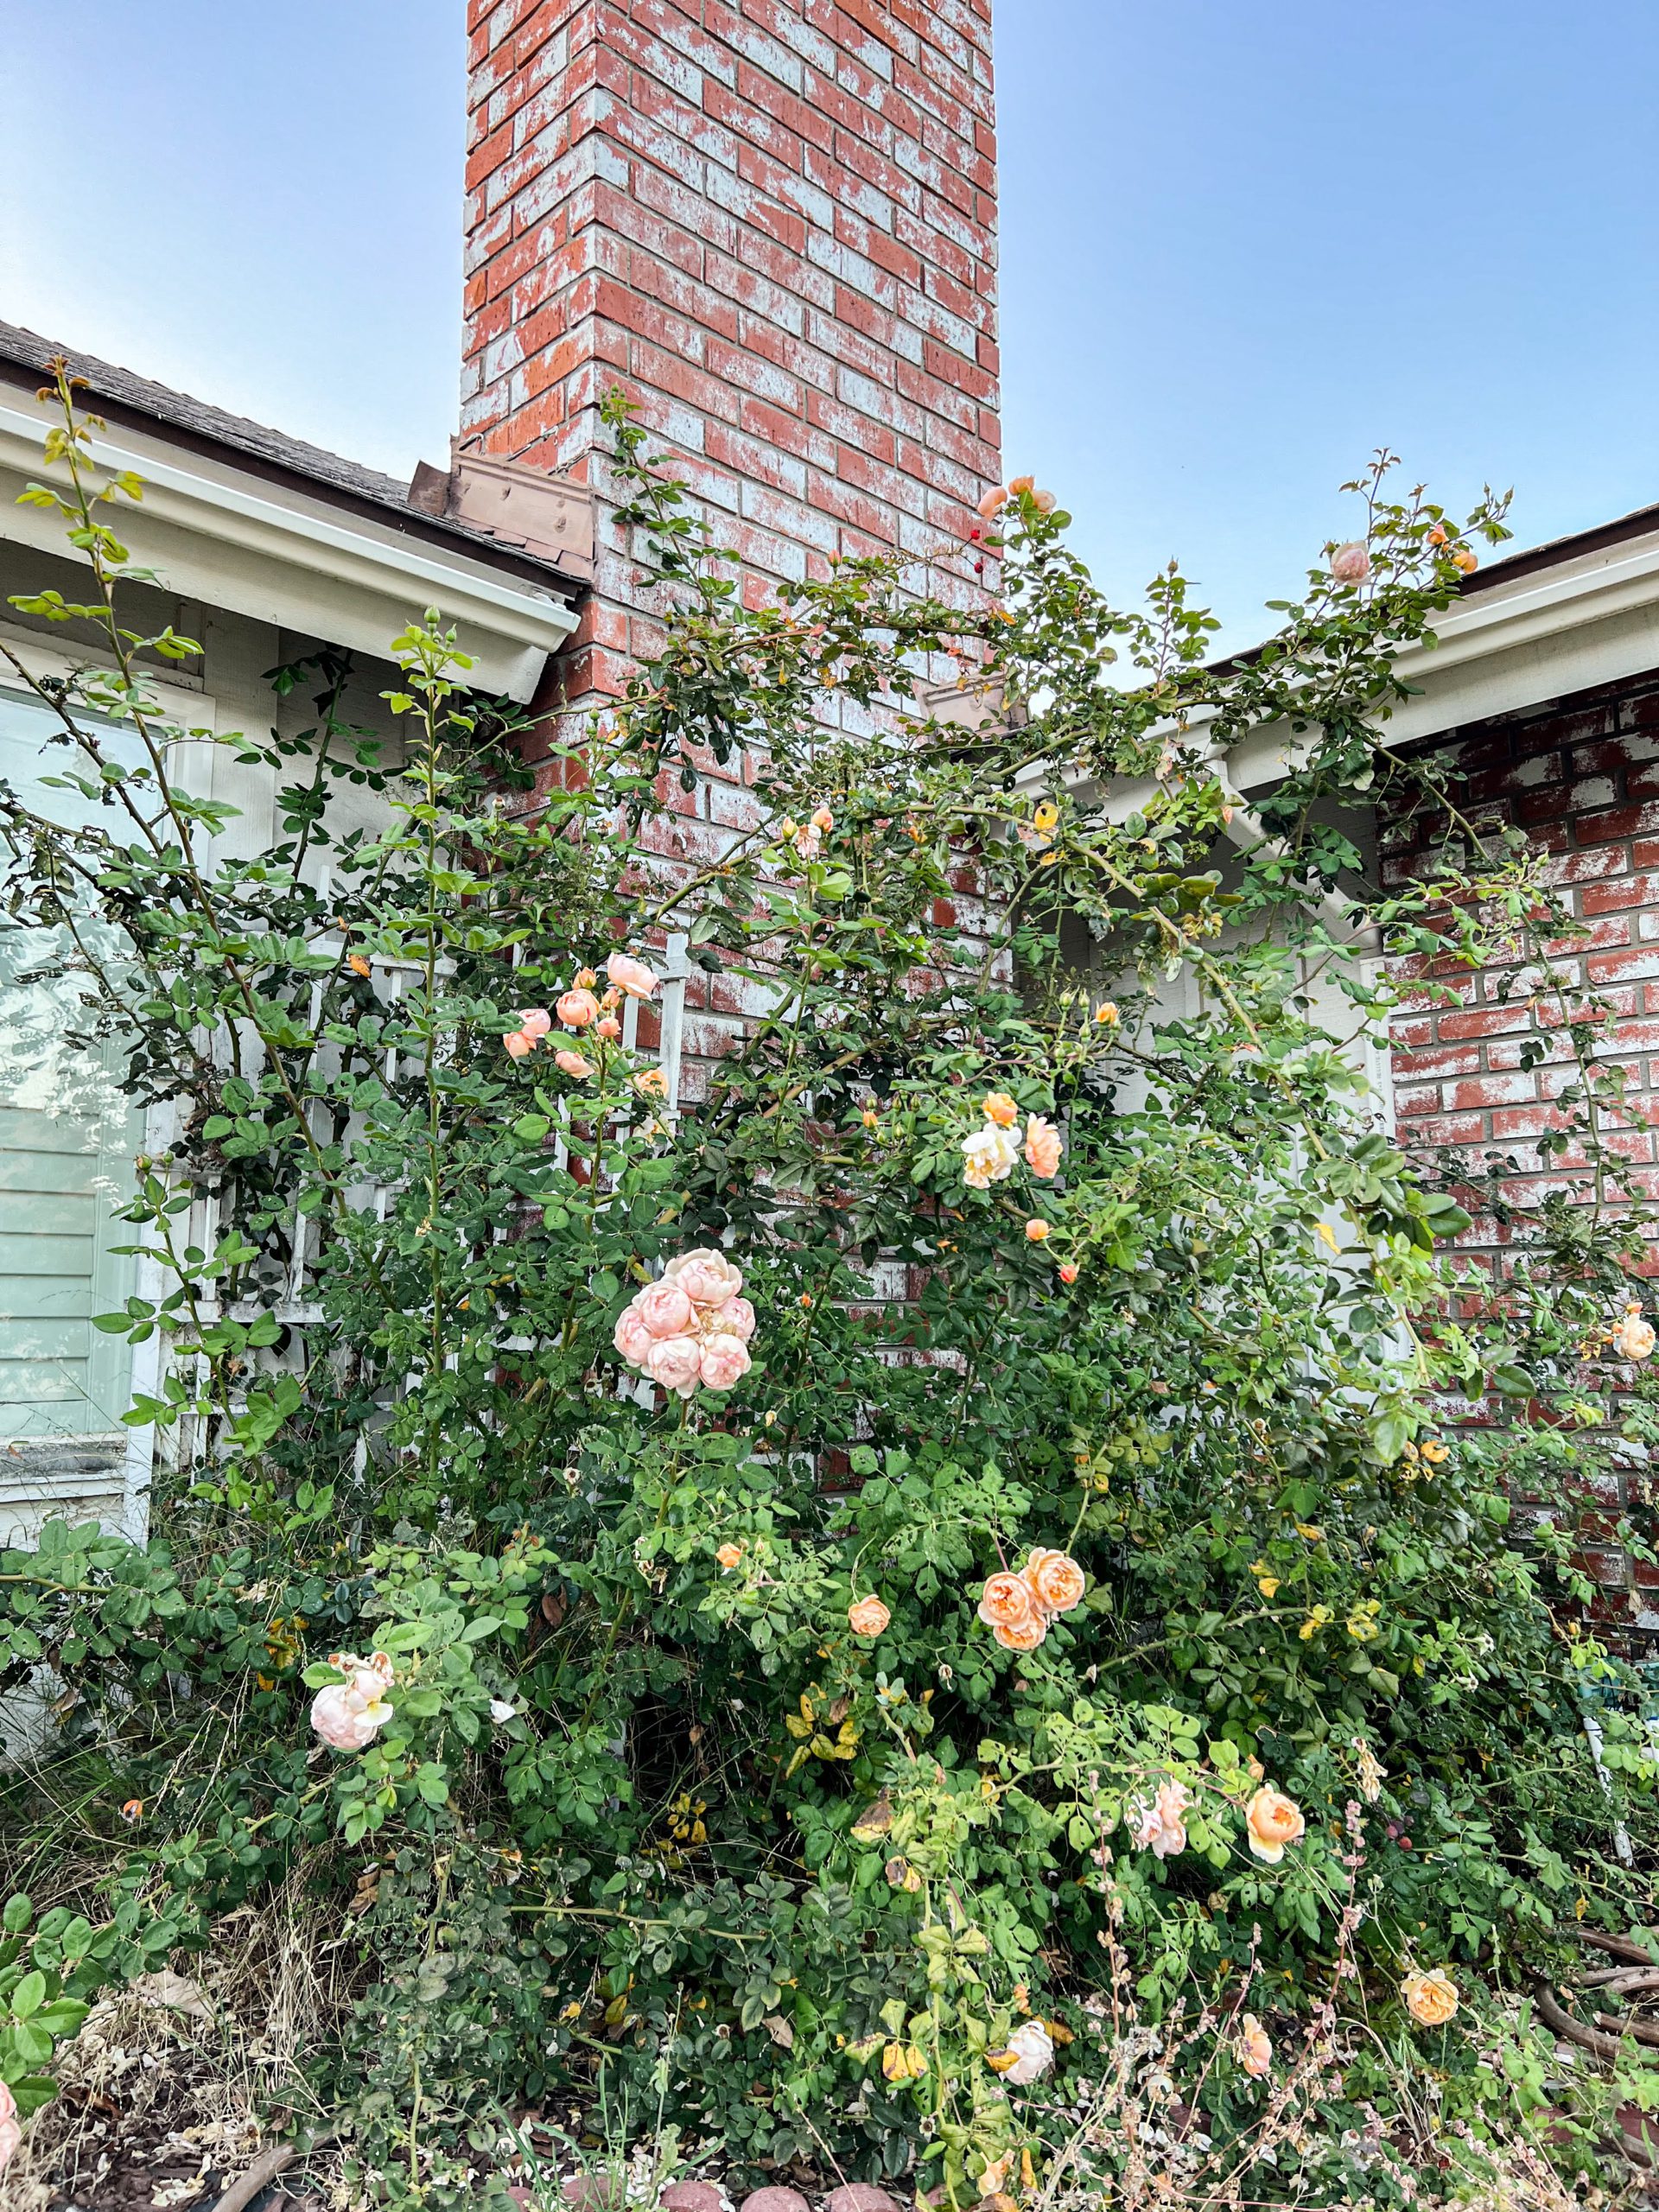 An overgrown climbing rose bush in front of a house with brick siding, a brick chimney, and white trim along the eaves. The rose bush has several clusters of pale peach roses.